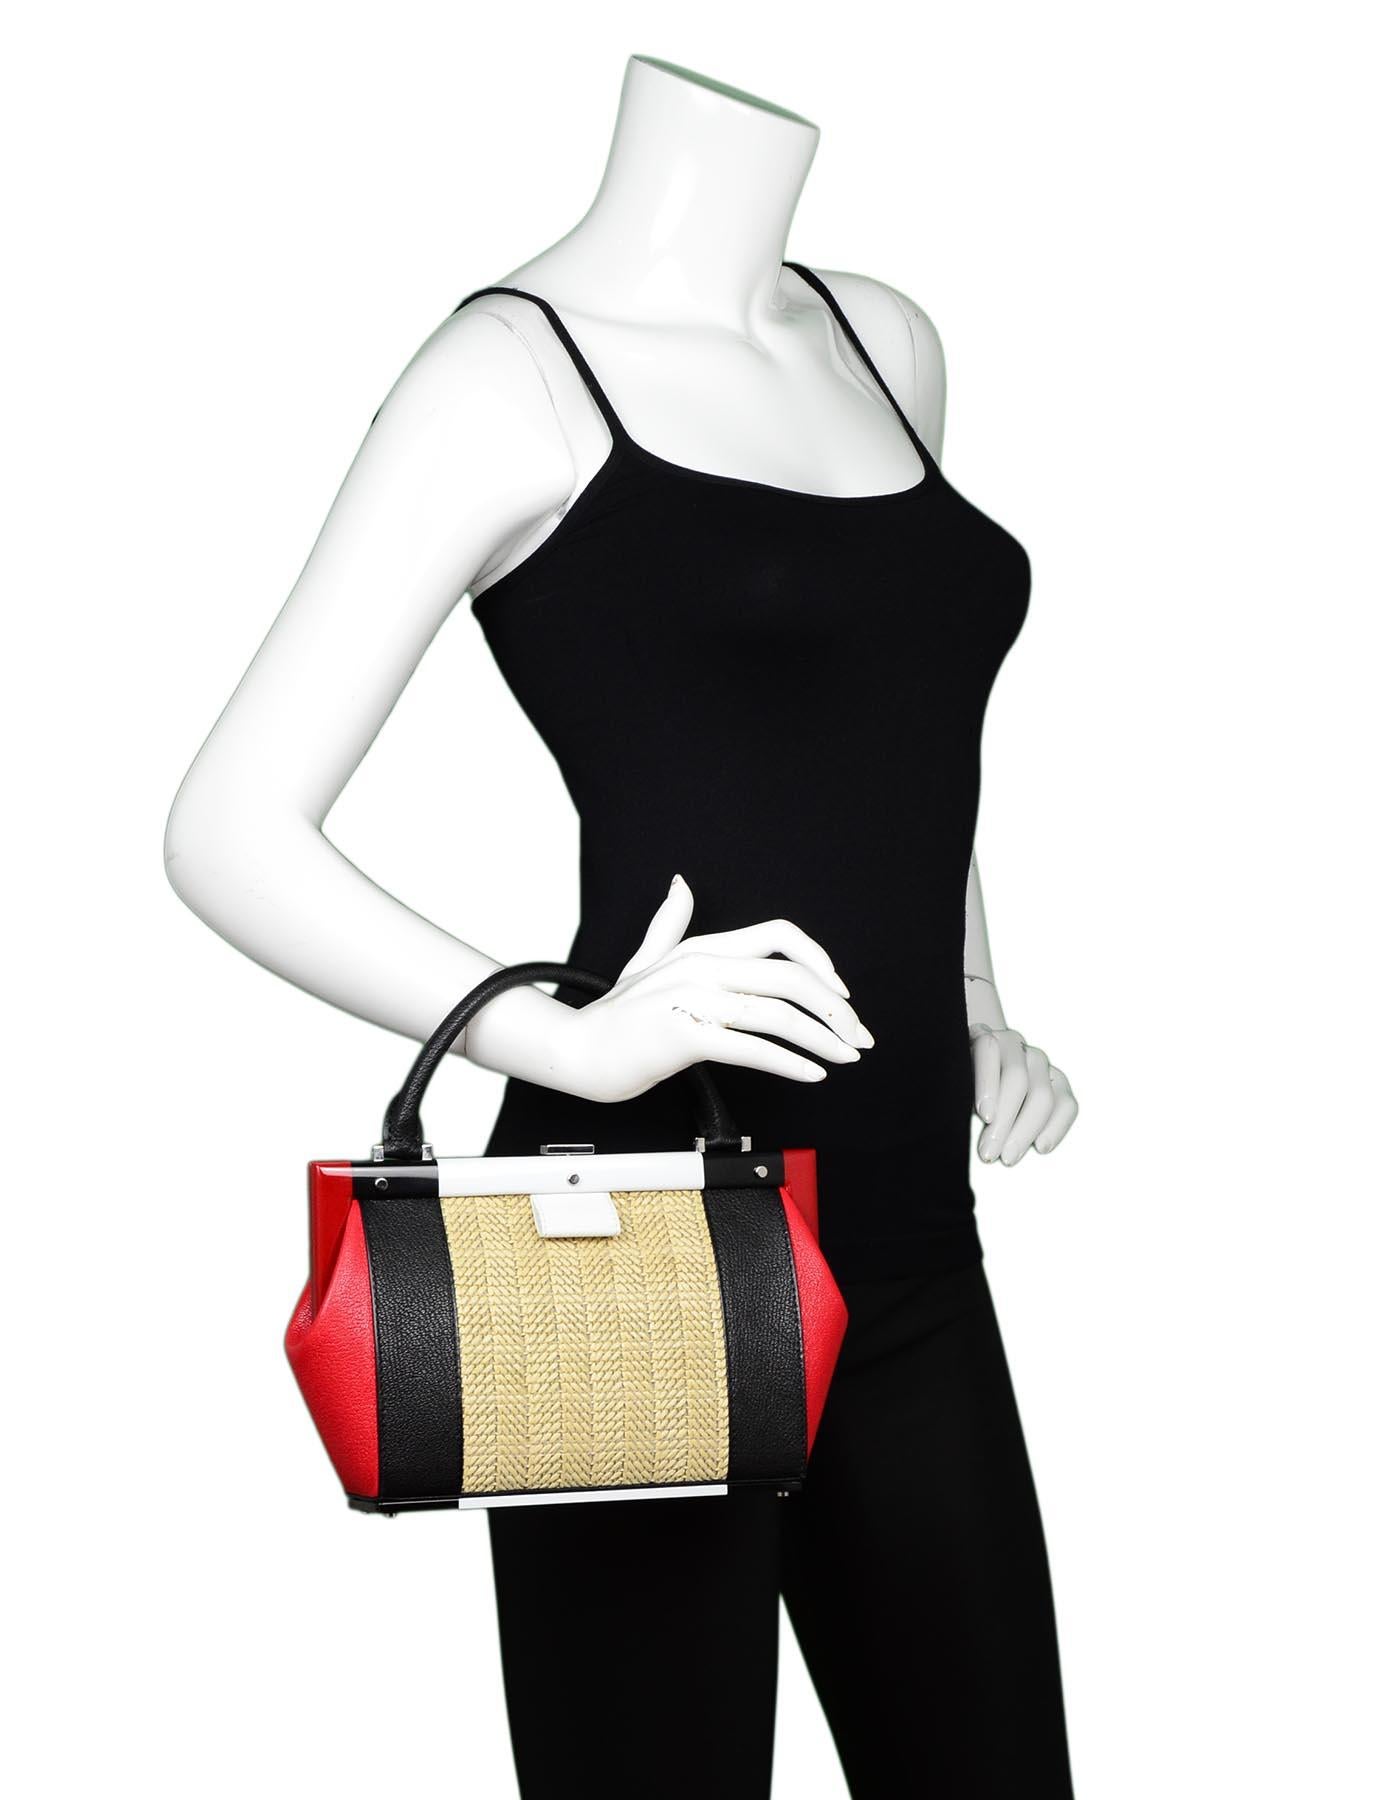 Perrin Black/Red/White Calfskin Leather/Raffia Le Bavolet Top Handle Frame Bag

Color: Black, red, white, tan
Hardware: Silvertone
Materials: Calfskin leather, raffia, metal
Lining: White leather 
Closure/Opening: Frame style with clasp